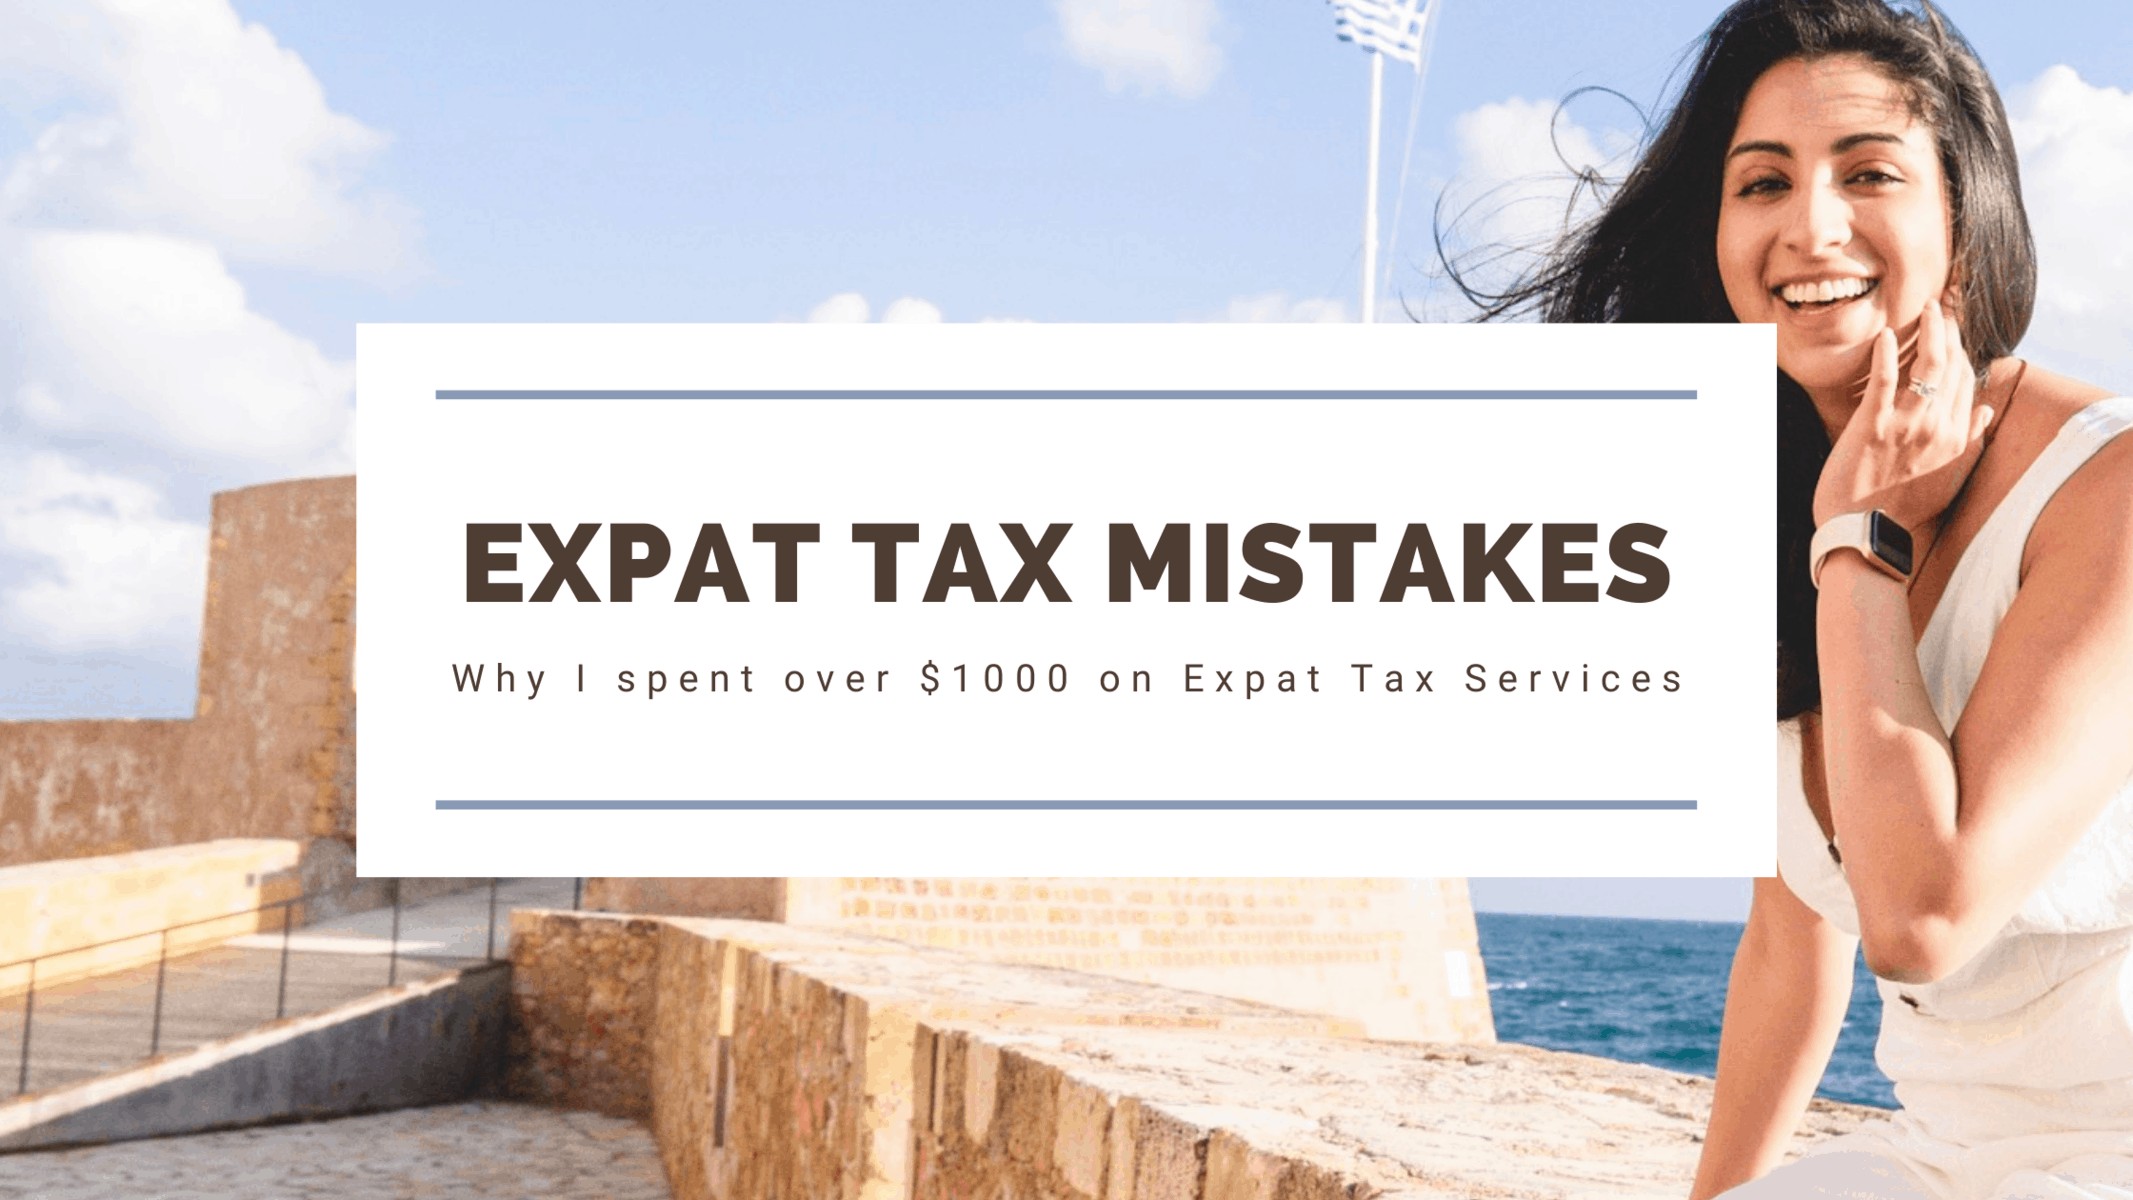 American Expat Tax Services: Why I spent over $1000 on US Expat Tax Services